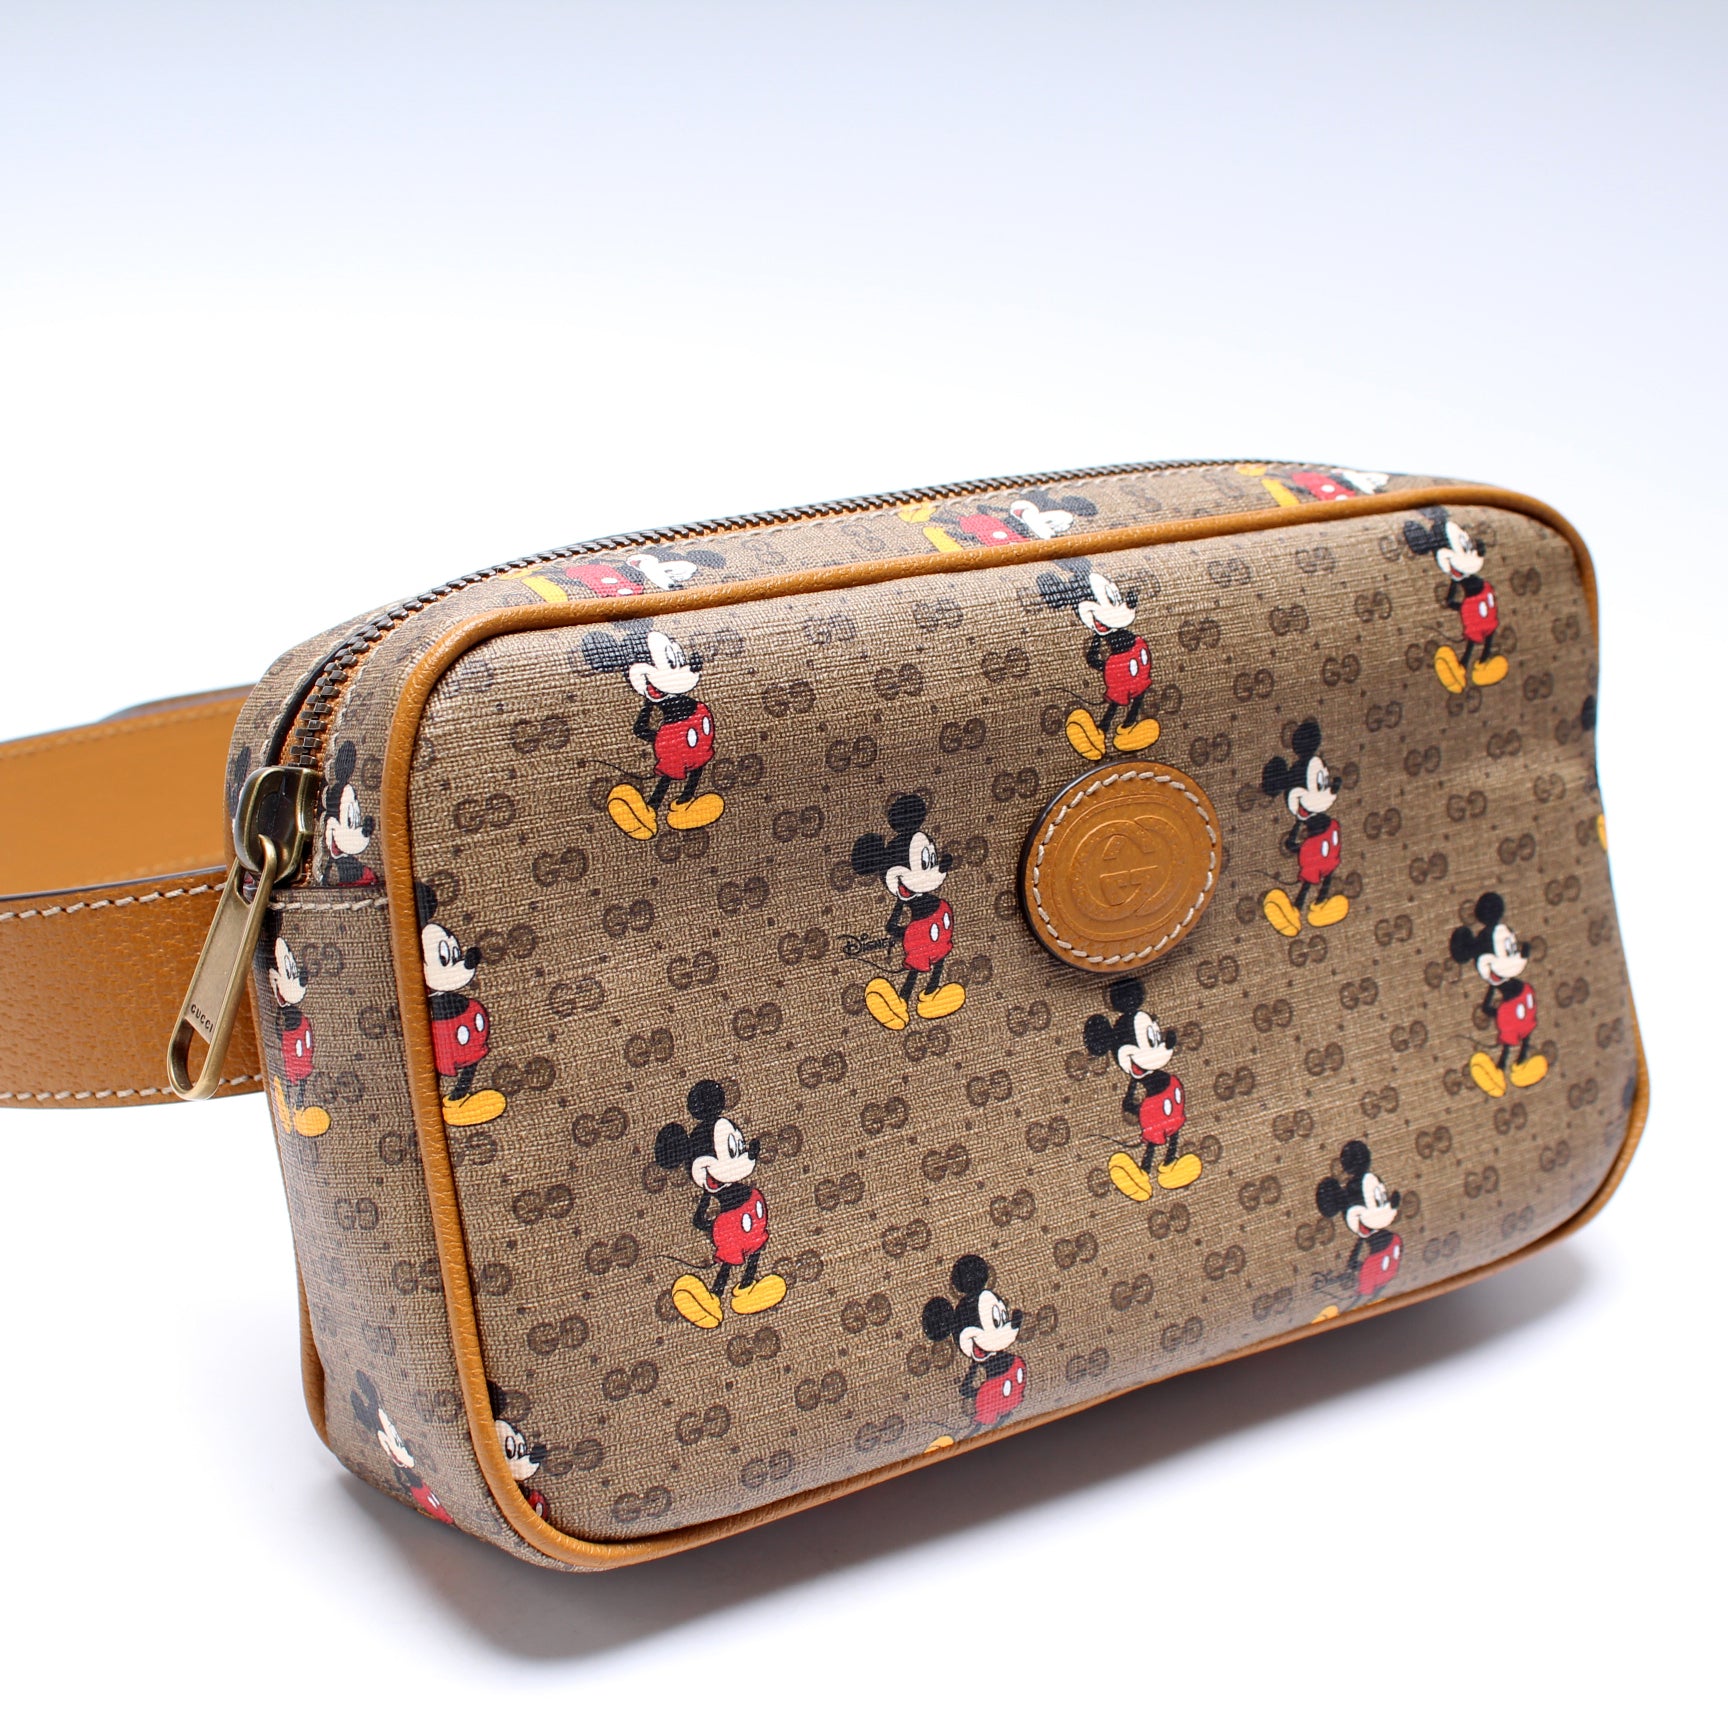 New Mickey Mouse Fine Leather Handbag Collection | Bags, Studded backpack,  Studded bag